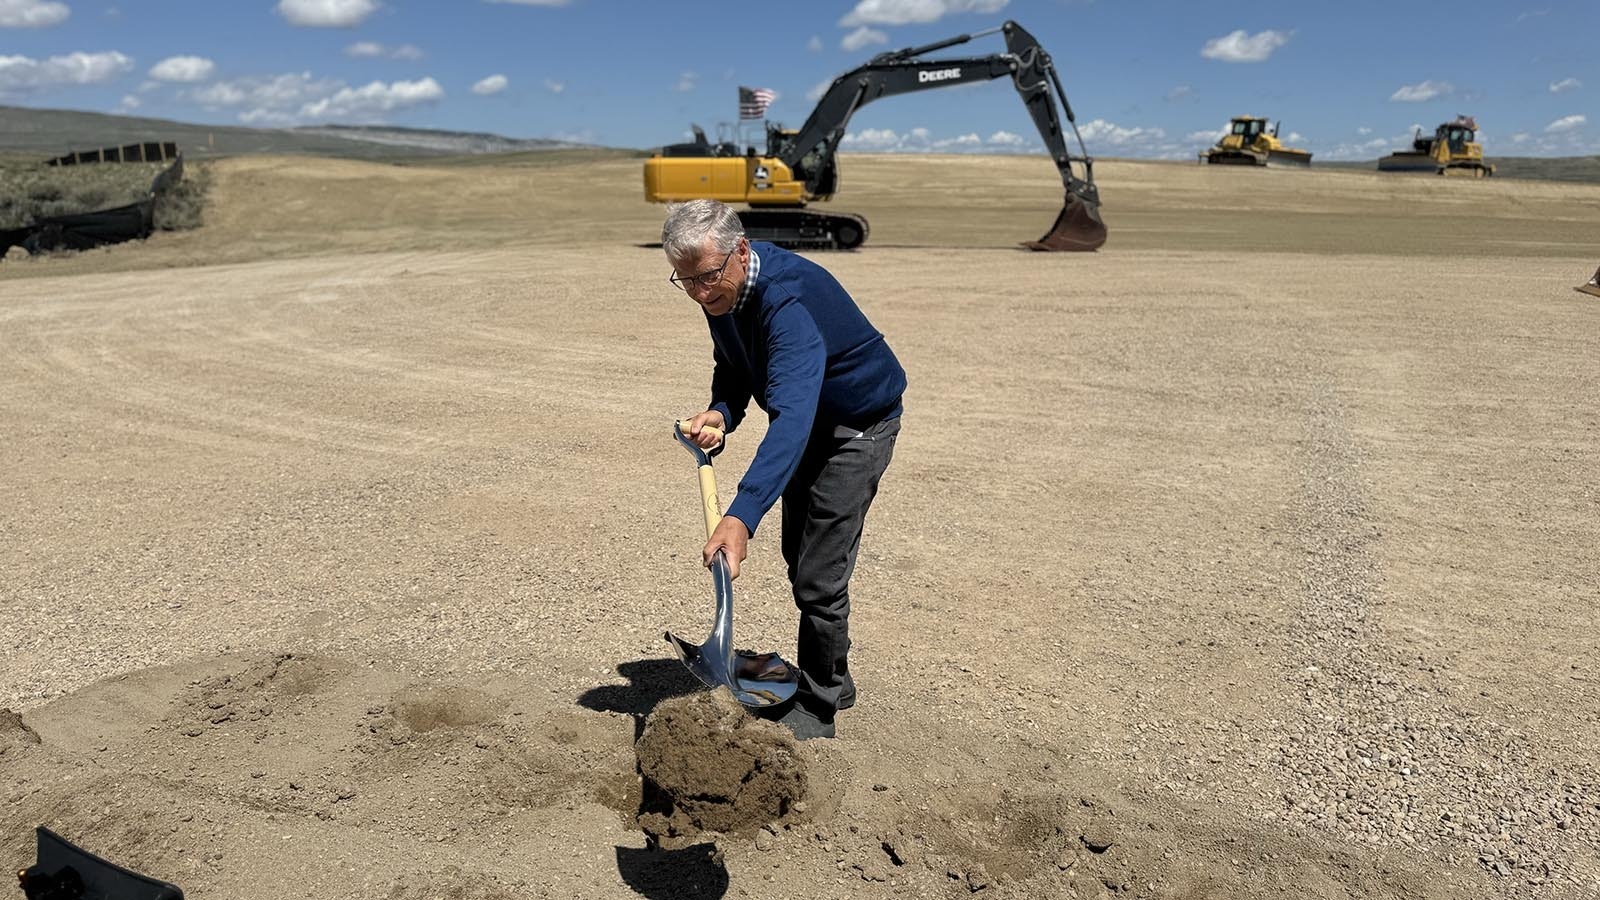 Billionaire Bill Gates took his turn at shoveling up some dirt in a groundbreaking ceremony for TerraPower’s nuclear reactor project in Kemmerer, Wyoming.